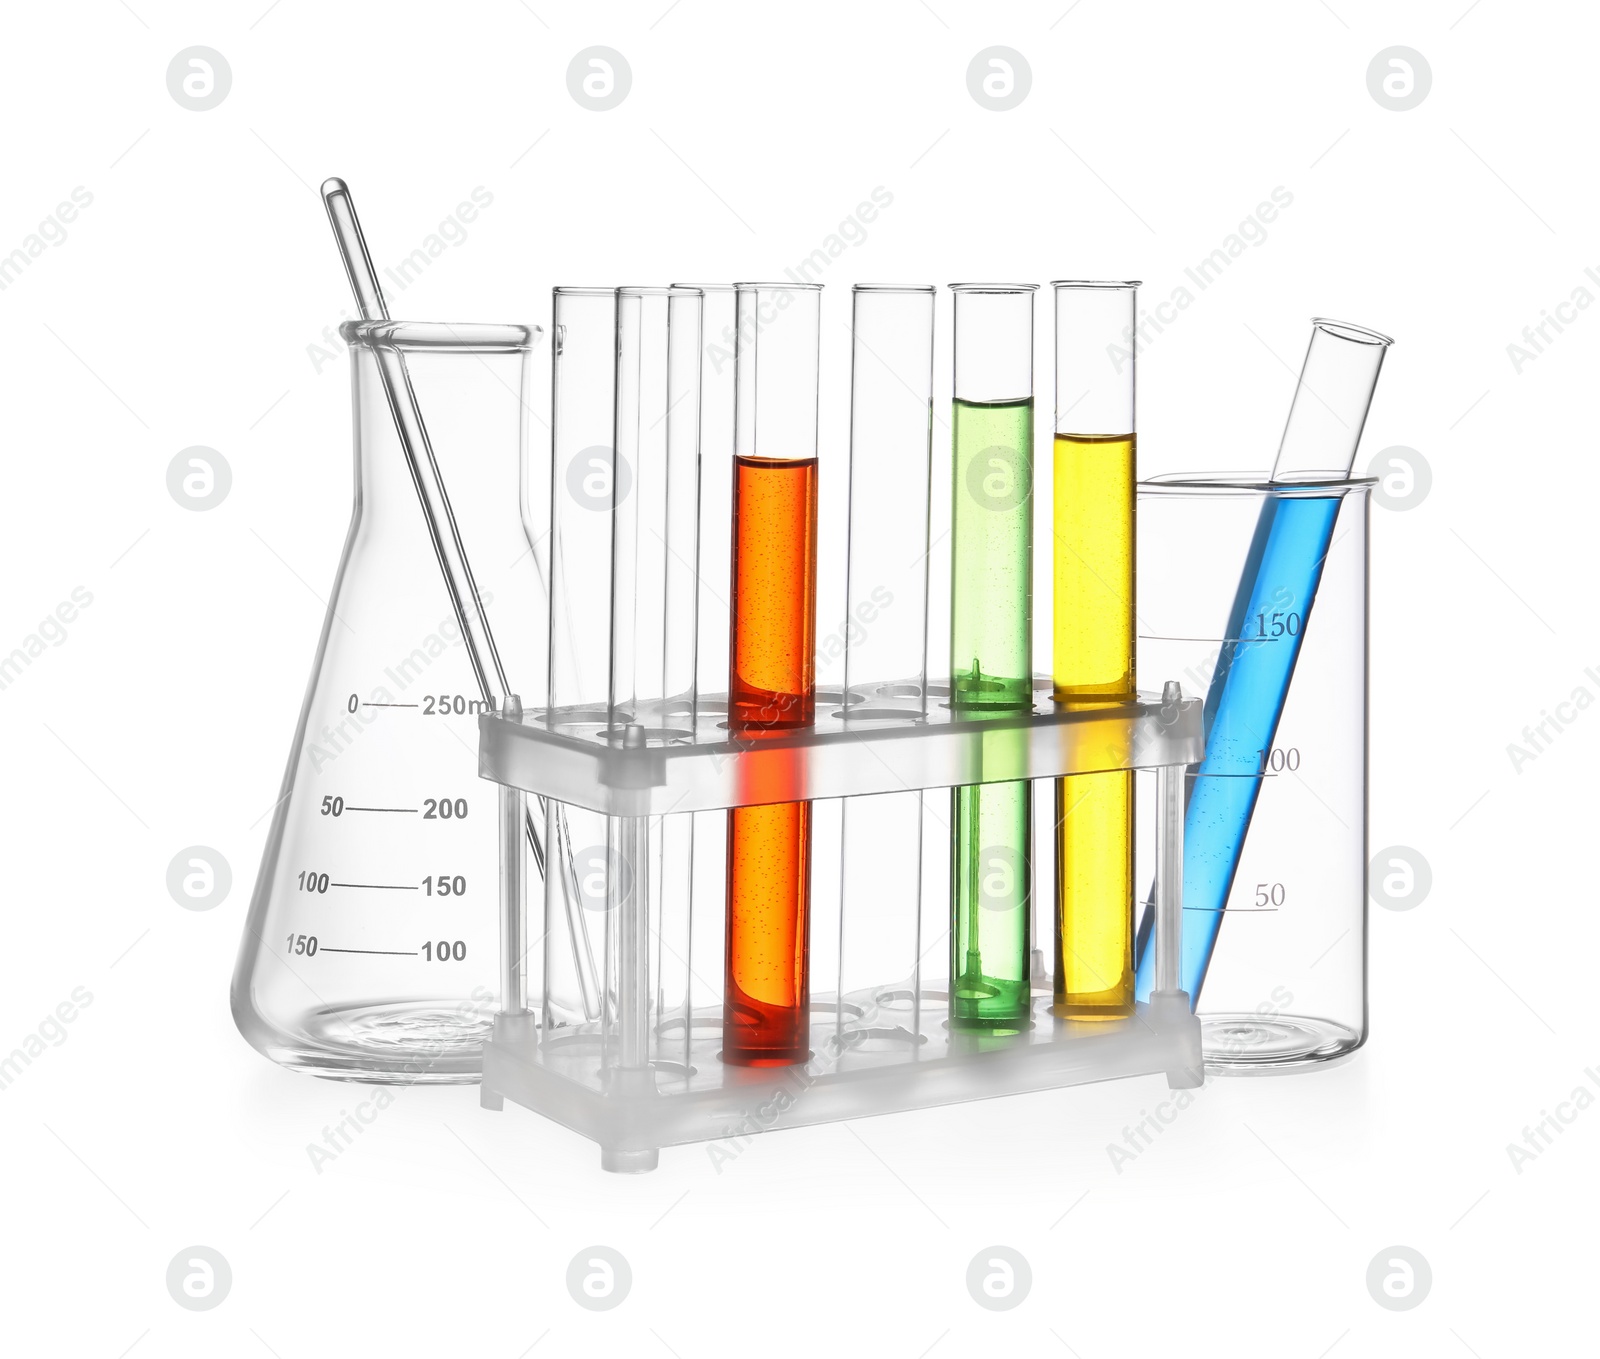 Image of Glass flask, beaker and test tubes with colorful liquids isolated on white